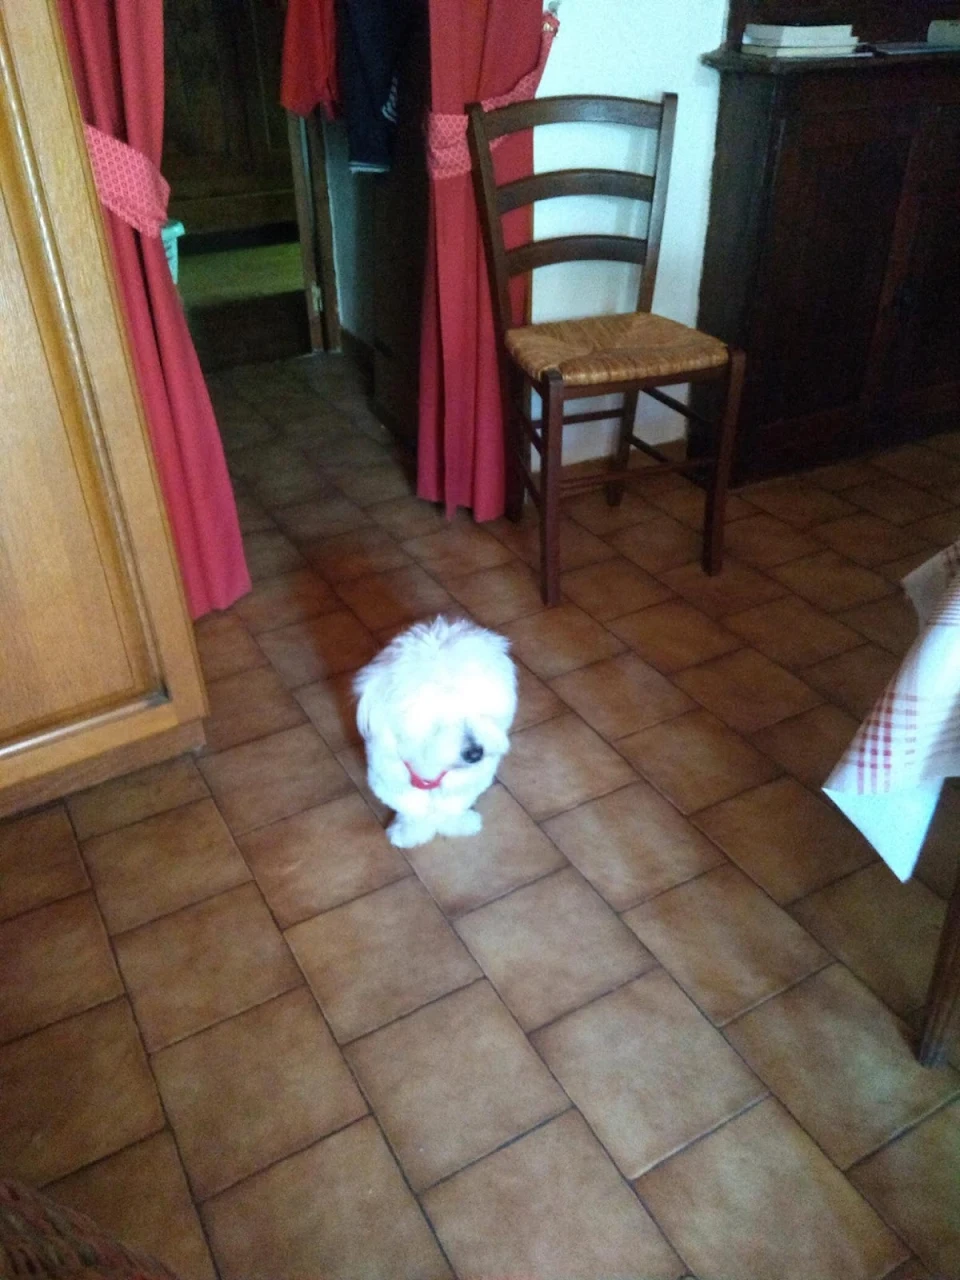 The way my uncle's dog put its front paws